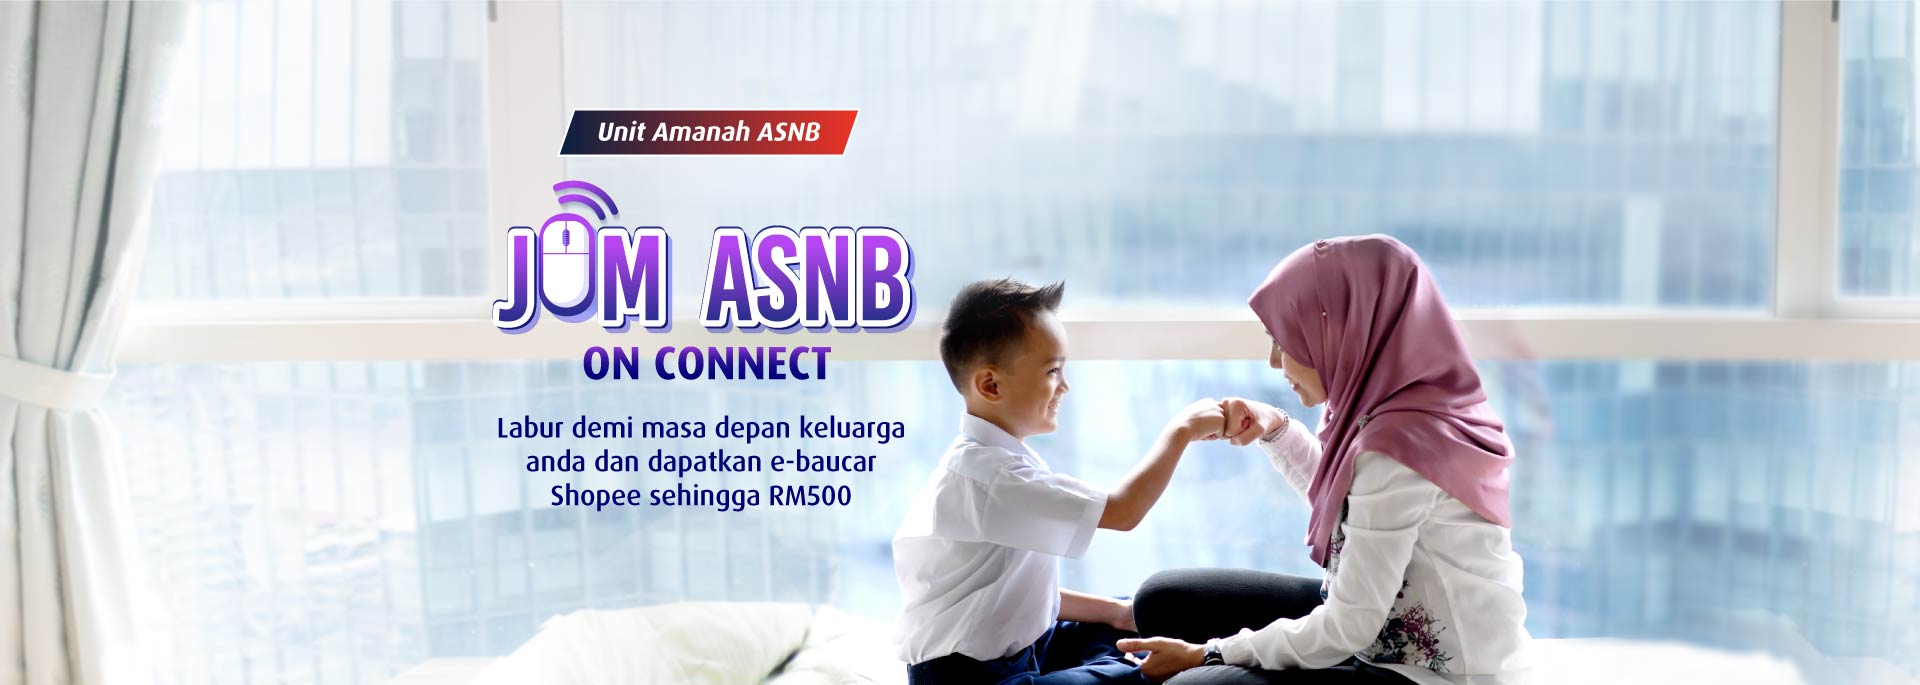 Jom ASNB on Connect